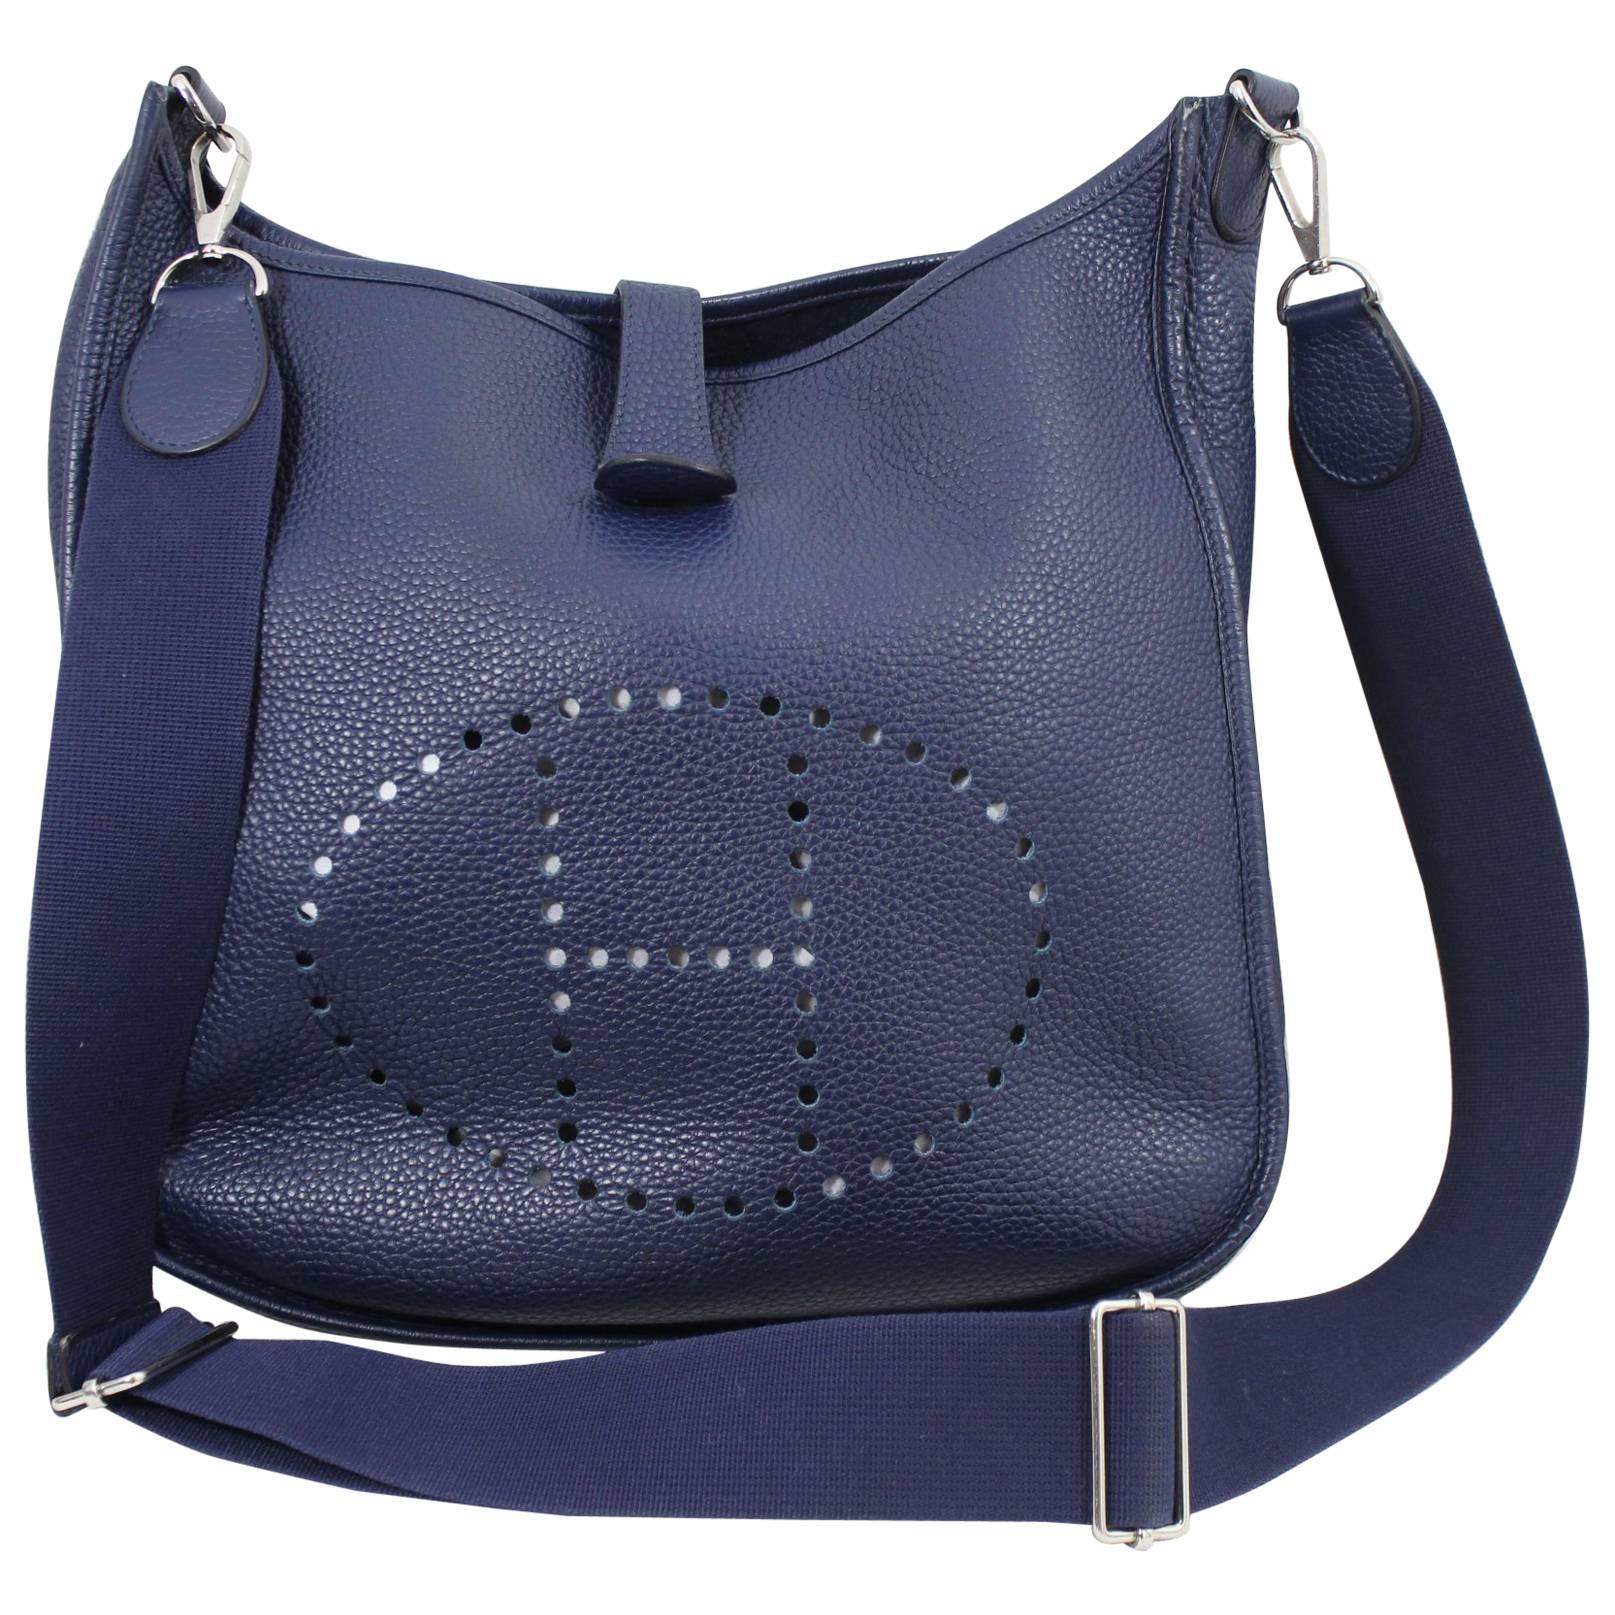 2013 Hermes Evelyne Blue Gained Leather Bag. Good condition